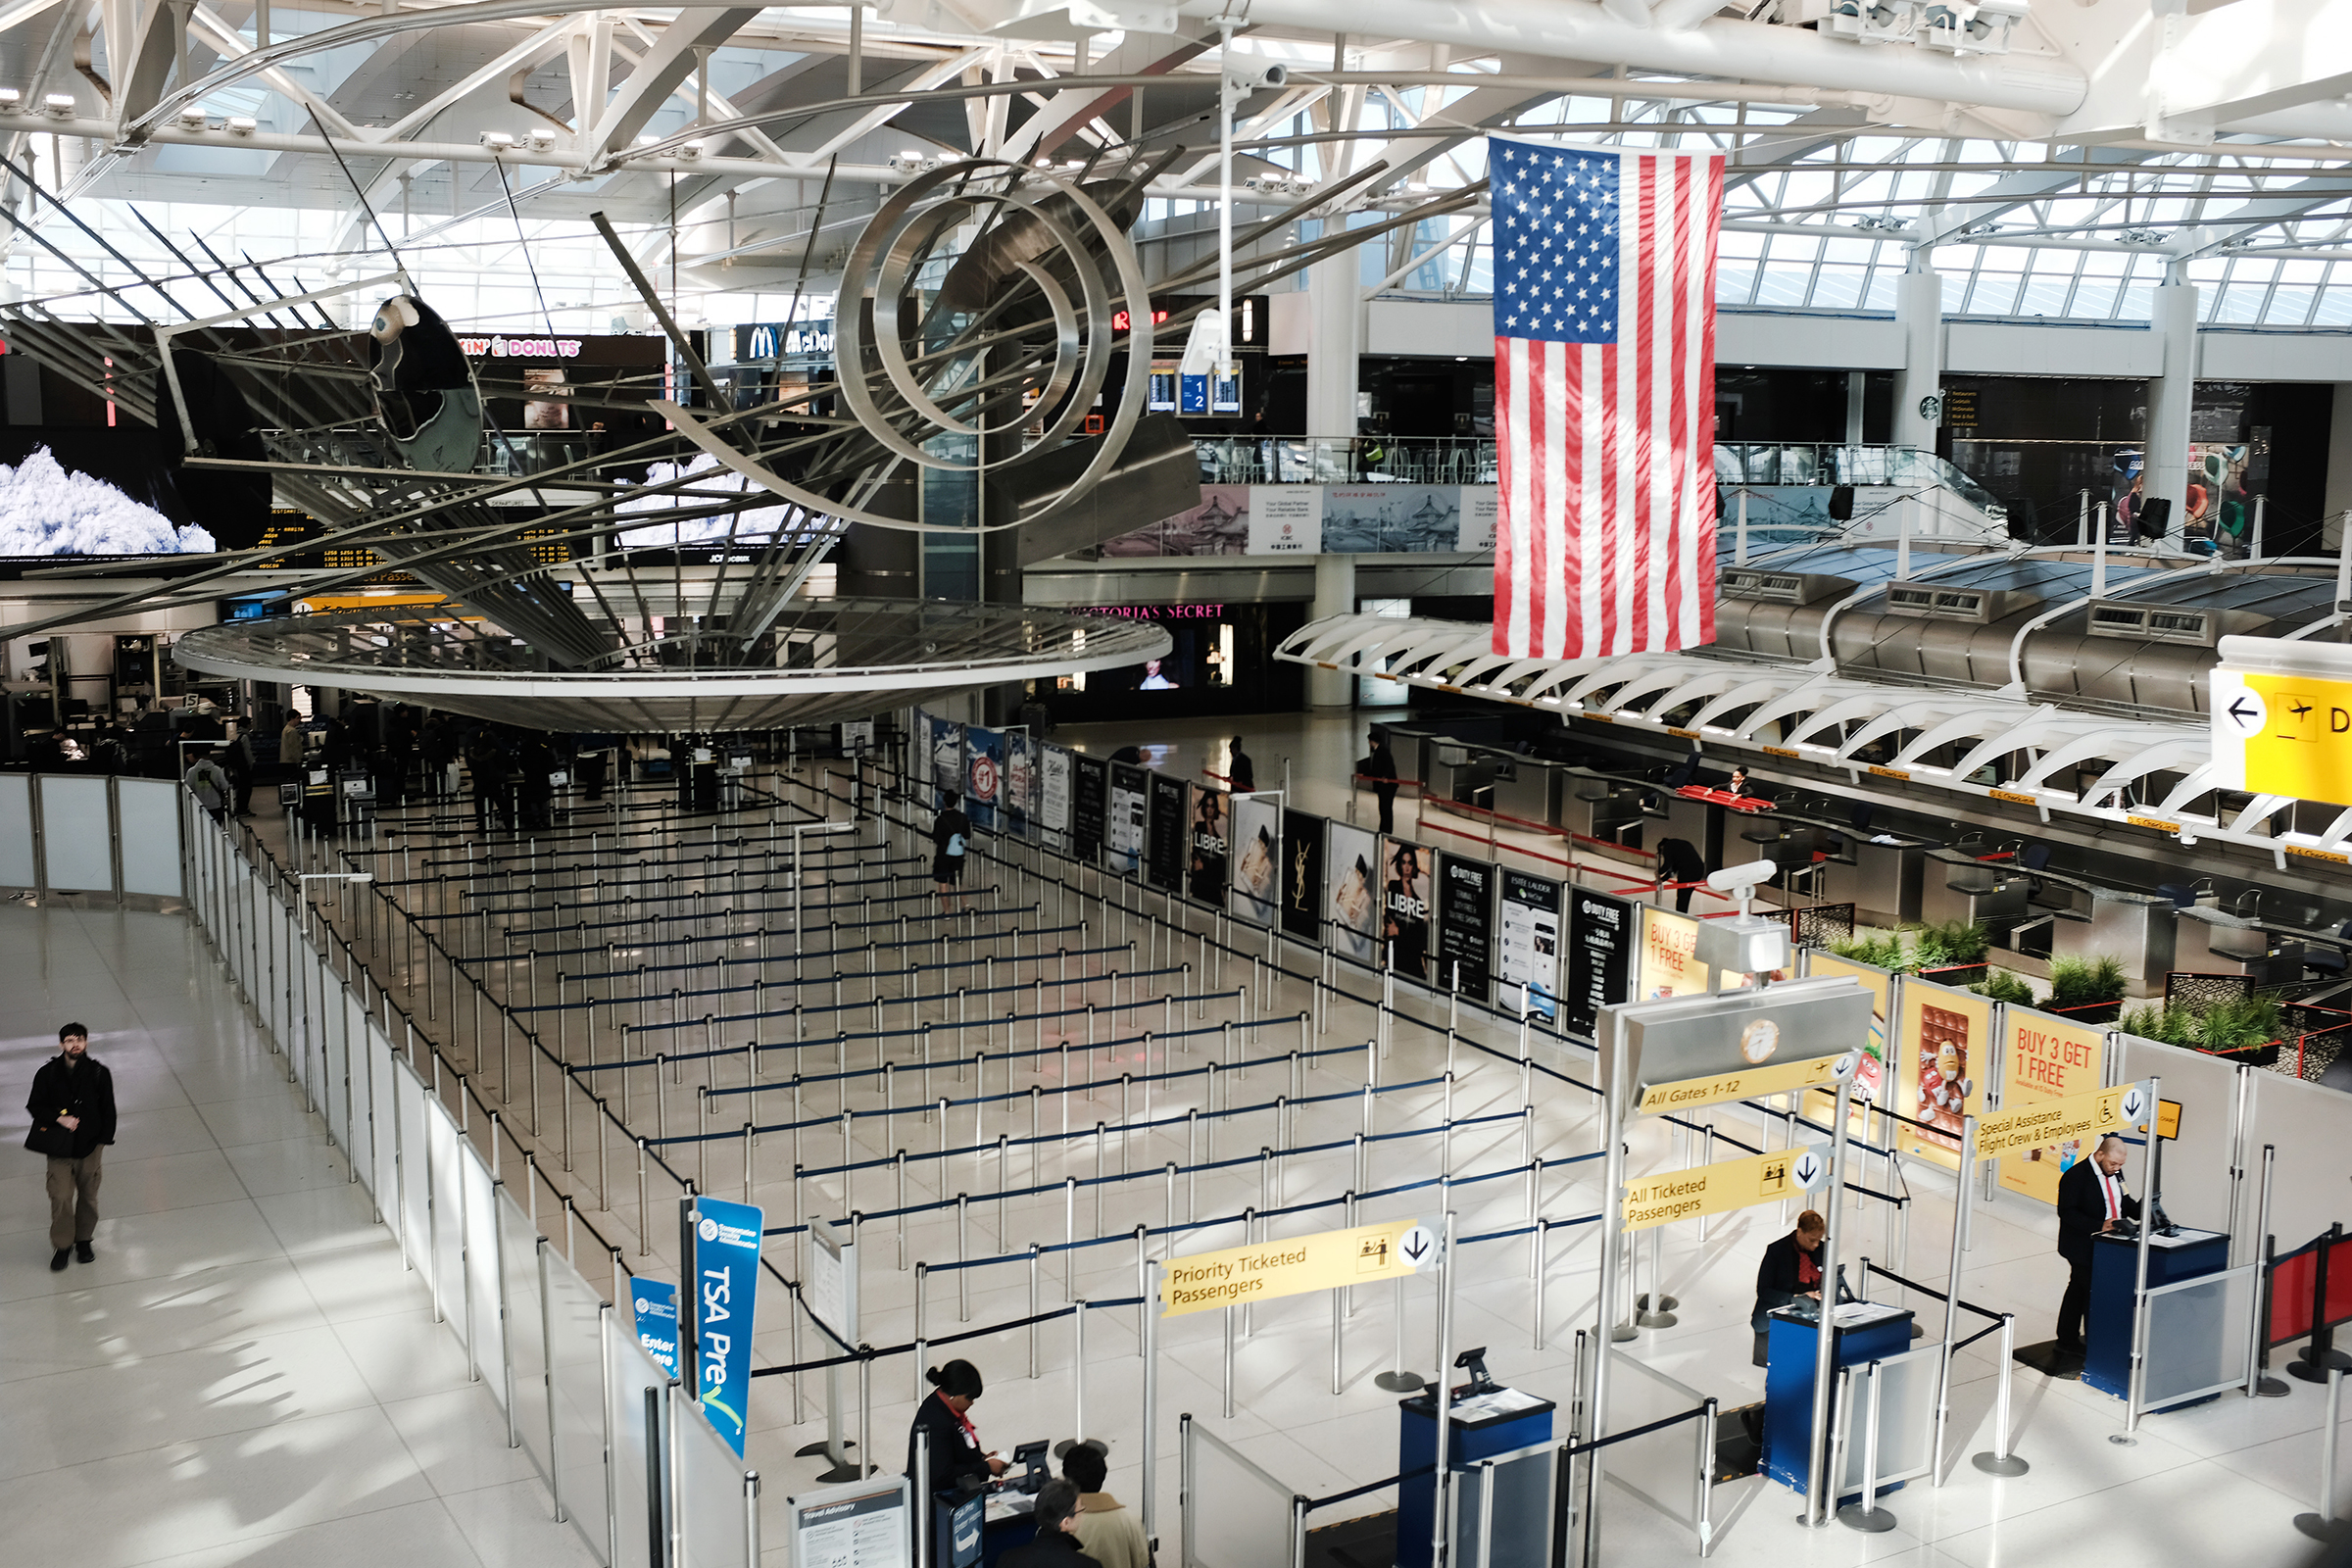 A sparse international departures terminal at John F. Kennedy International Airport in New York City on March 7. Days later, as concerns over the coronavirus grew, President Trump announced restrictions on travelers from Europe.